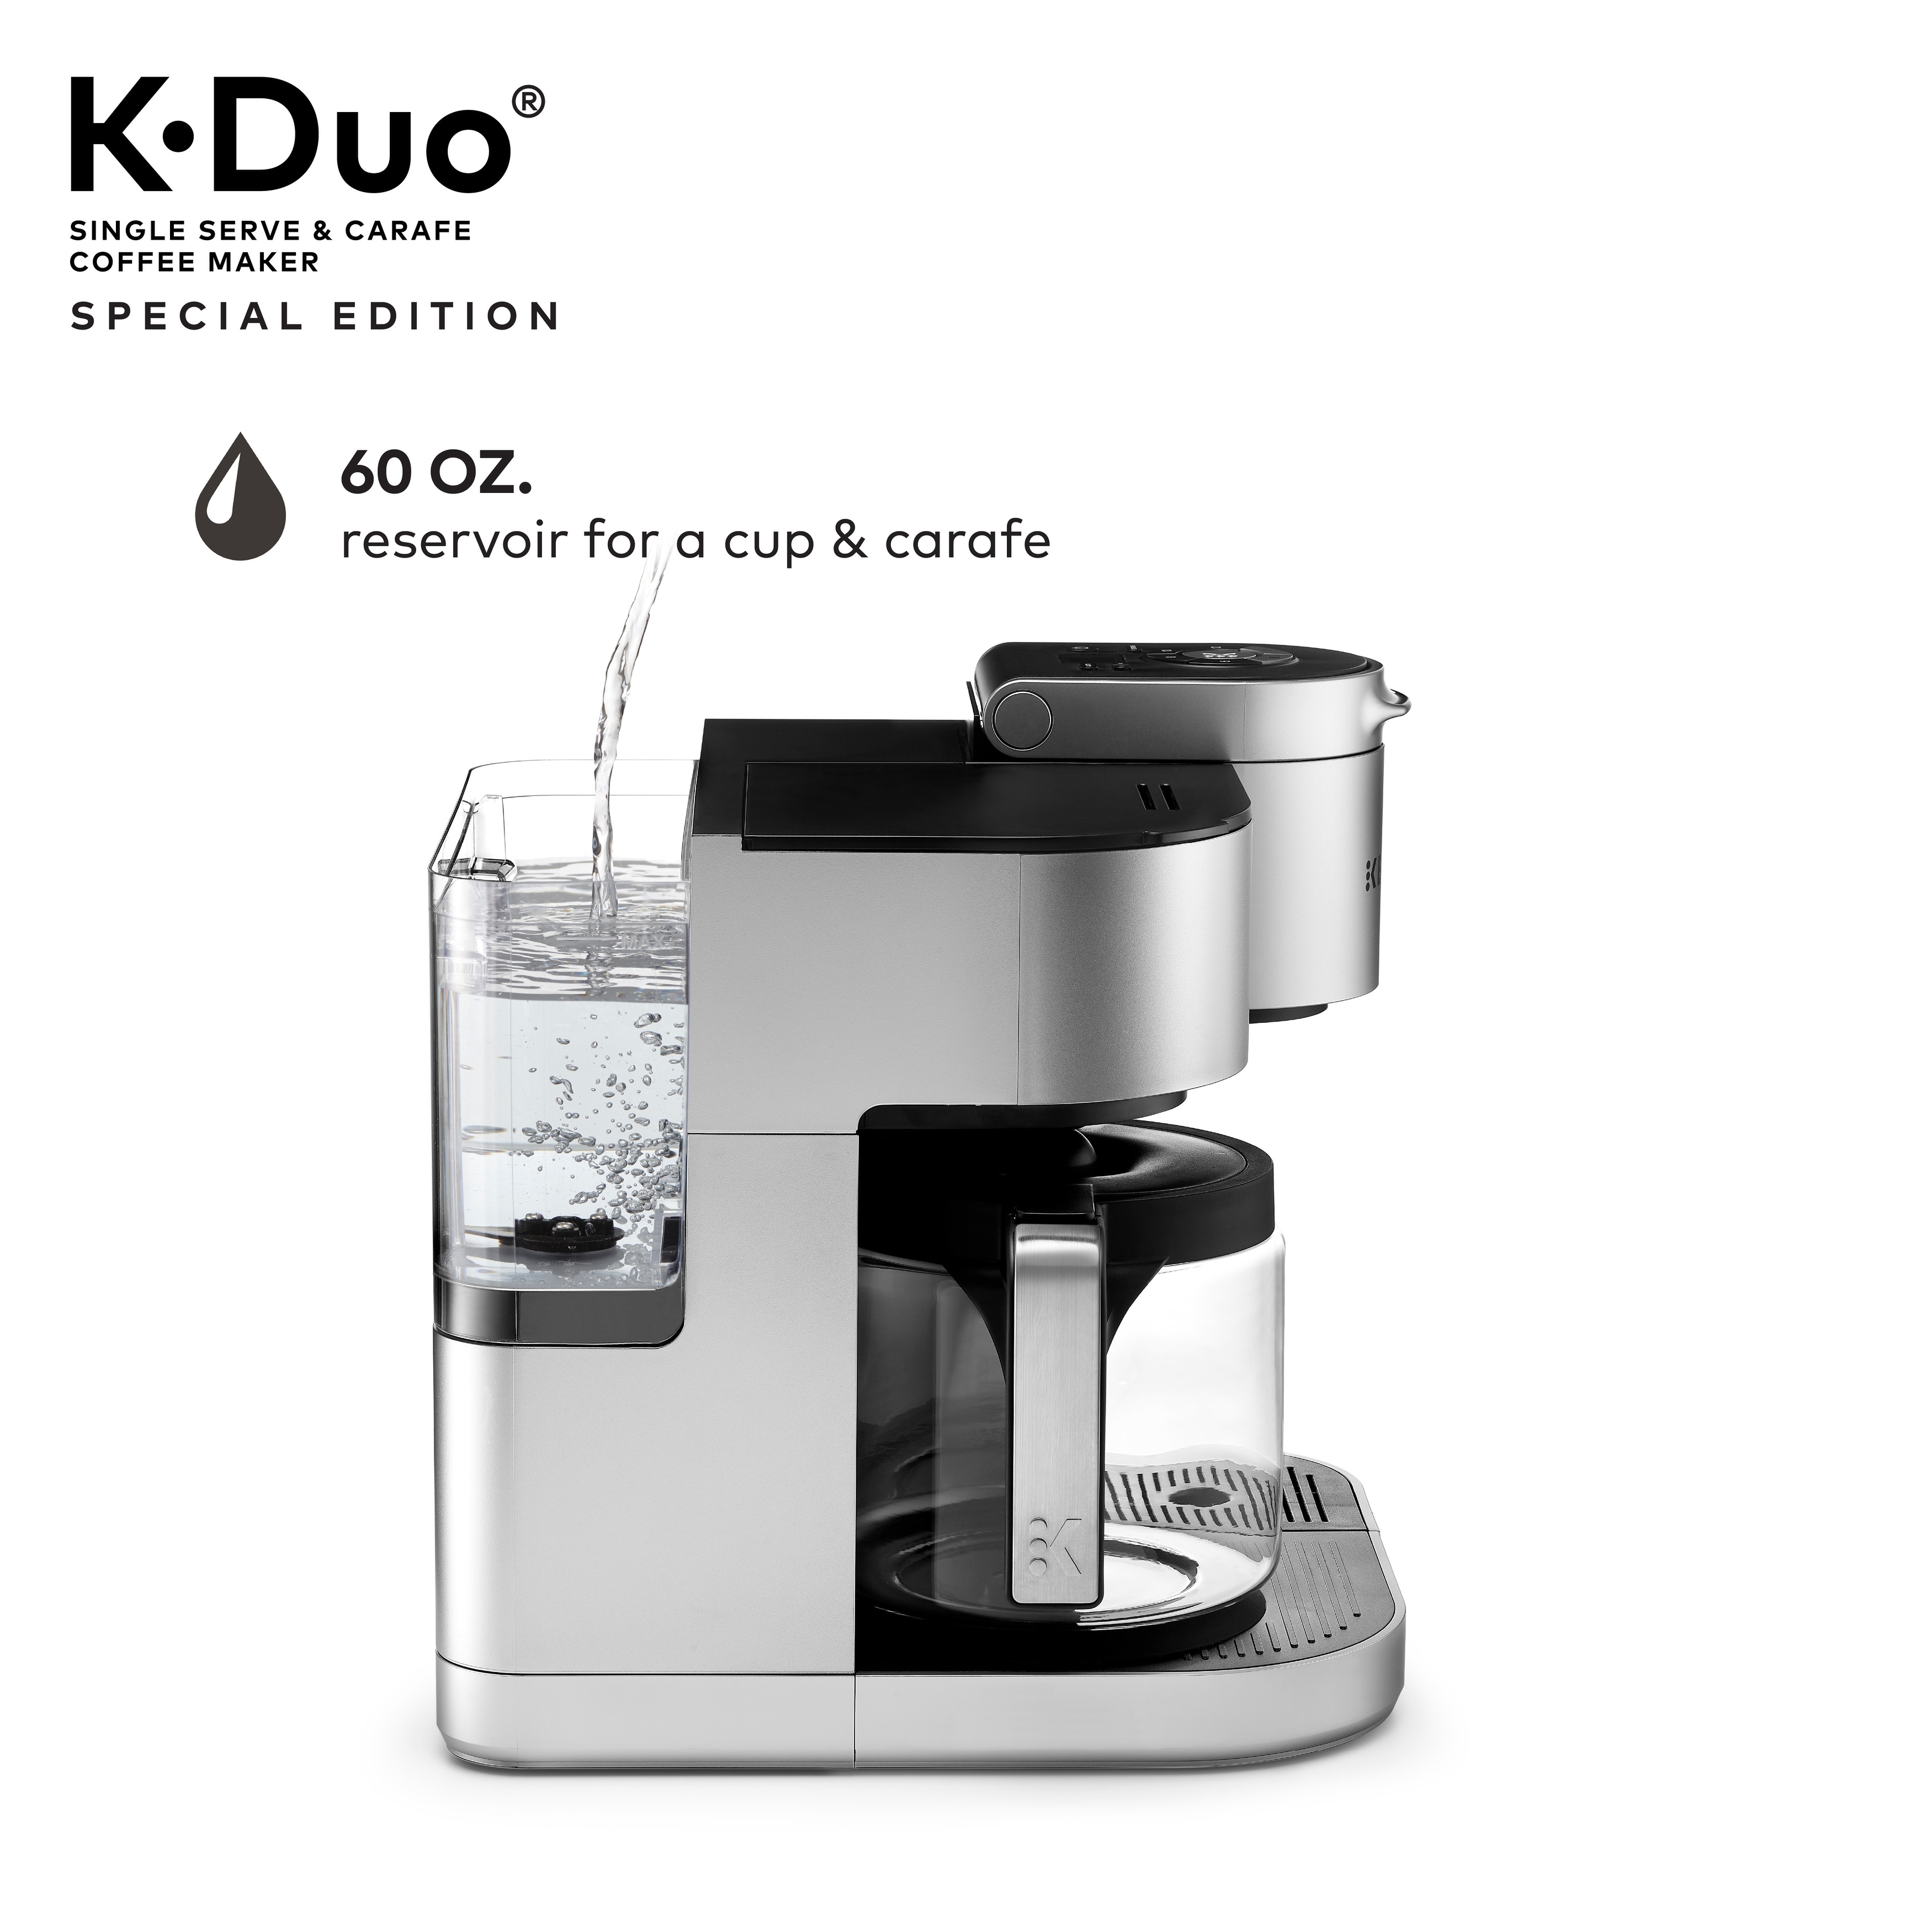 https://ak1.ostkcdn.com/images/products/is/images/direct/3838a7bf2b5ca85062d737069538517550fd9271/Keurig%C2%AE-K-Duo%C2%AE-Special-Edition-Single-Serve-%26-Carafe-Coffee-Maker.jpg